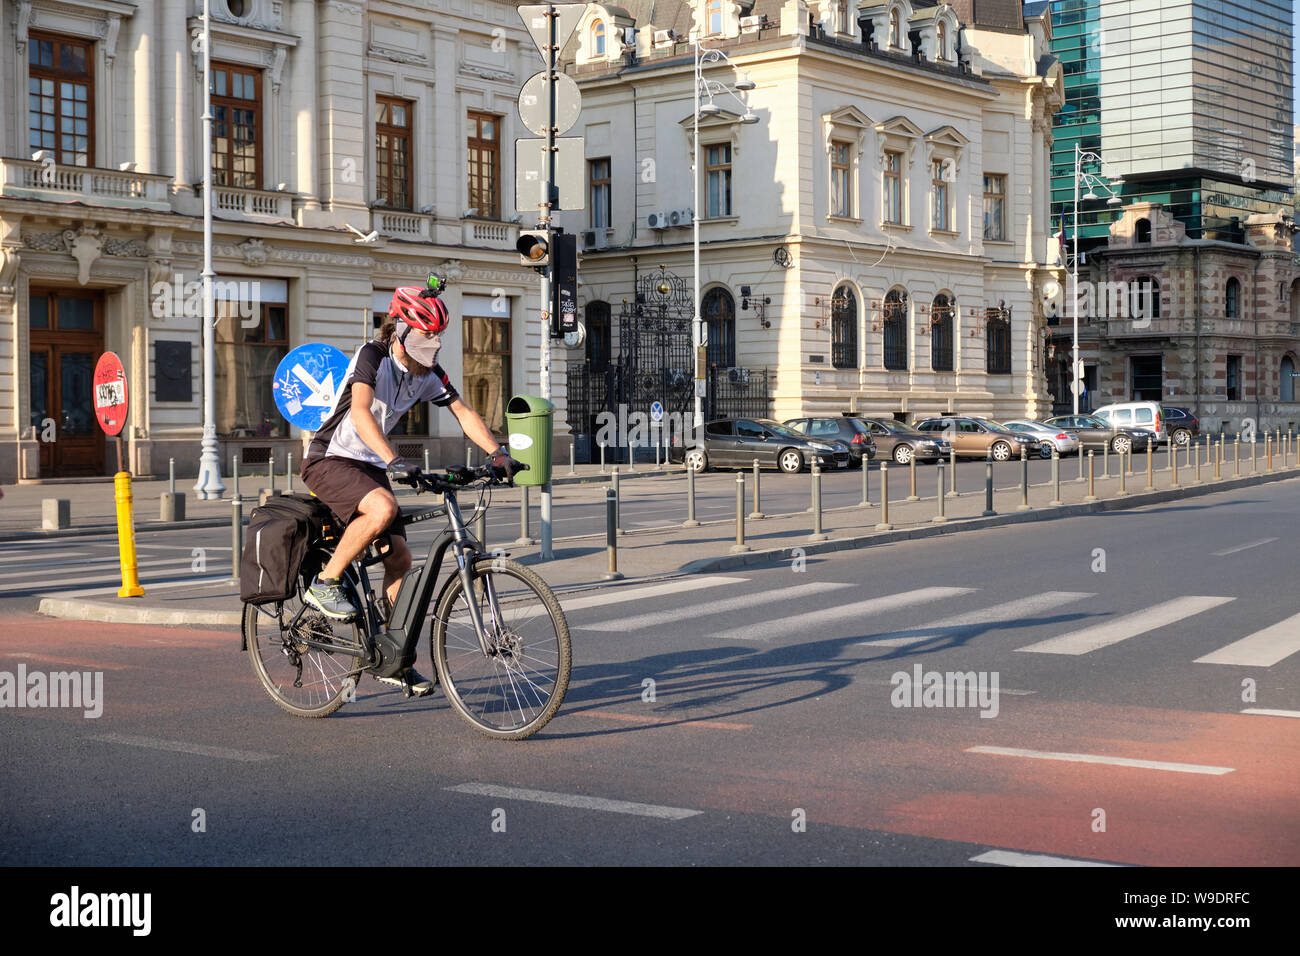 Cyclist with Helmet, camera and top, pollution mask crosses street on cycling lane in downtown Bucharest, Romania, Stock Photo